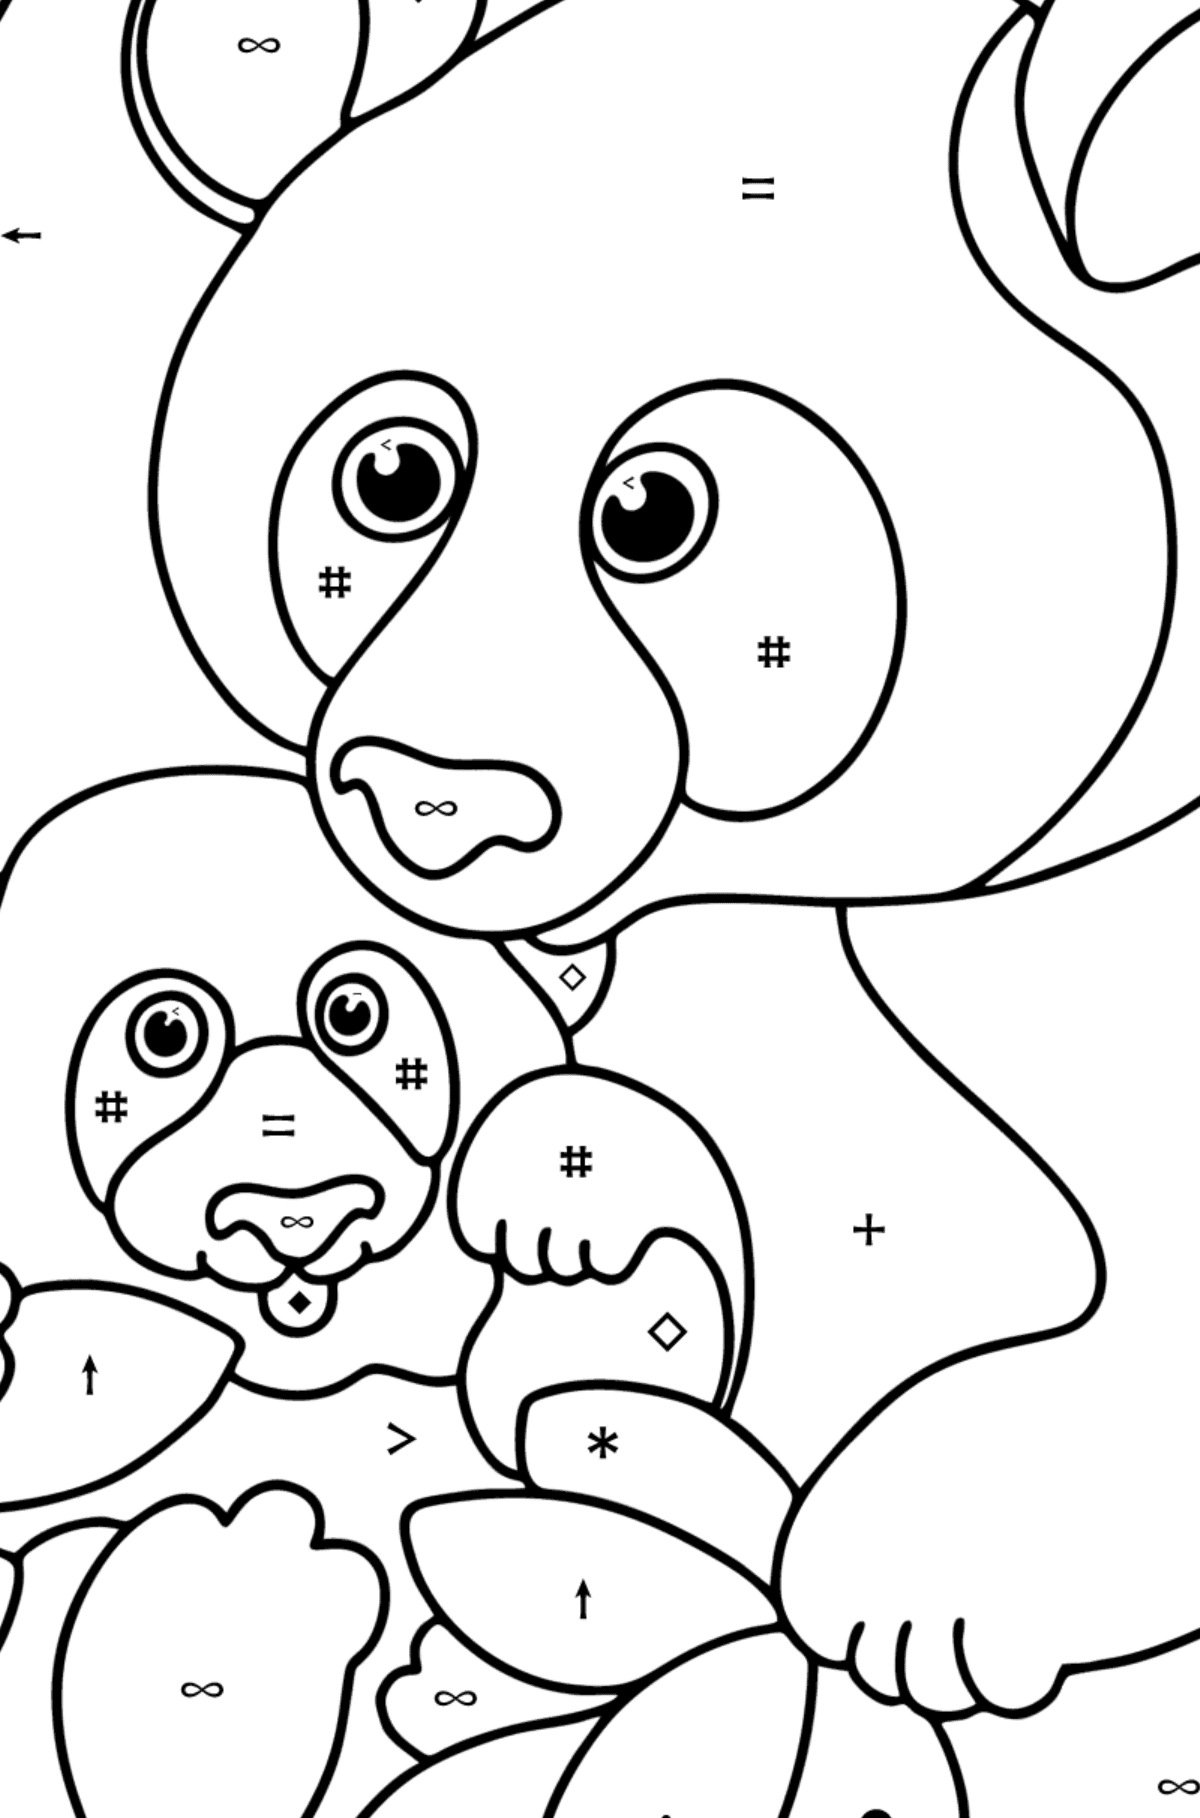 Giant panda with a cub coloring page - Coloring by Symbols for Kids